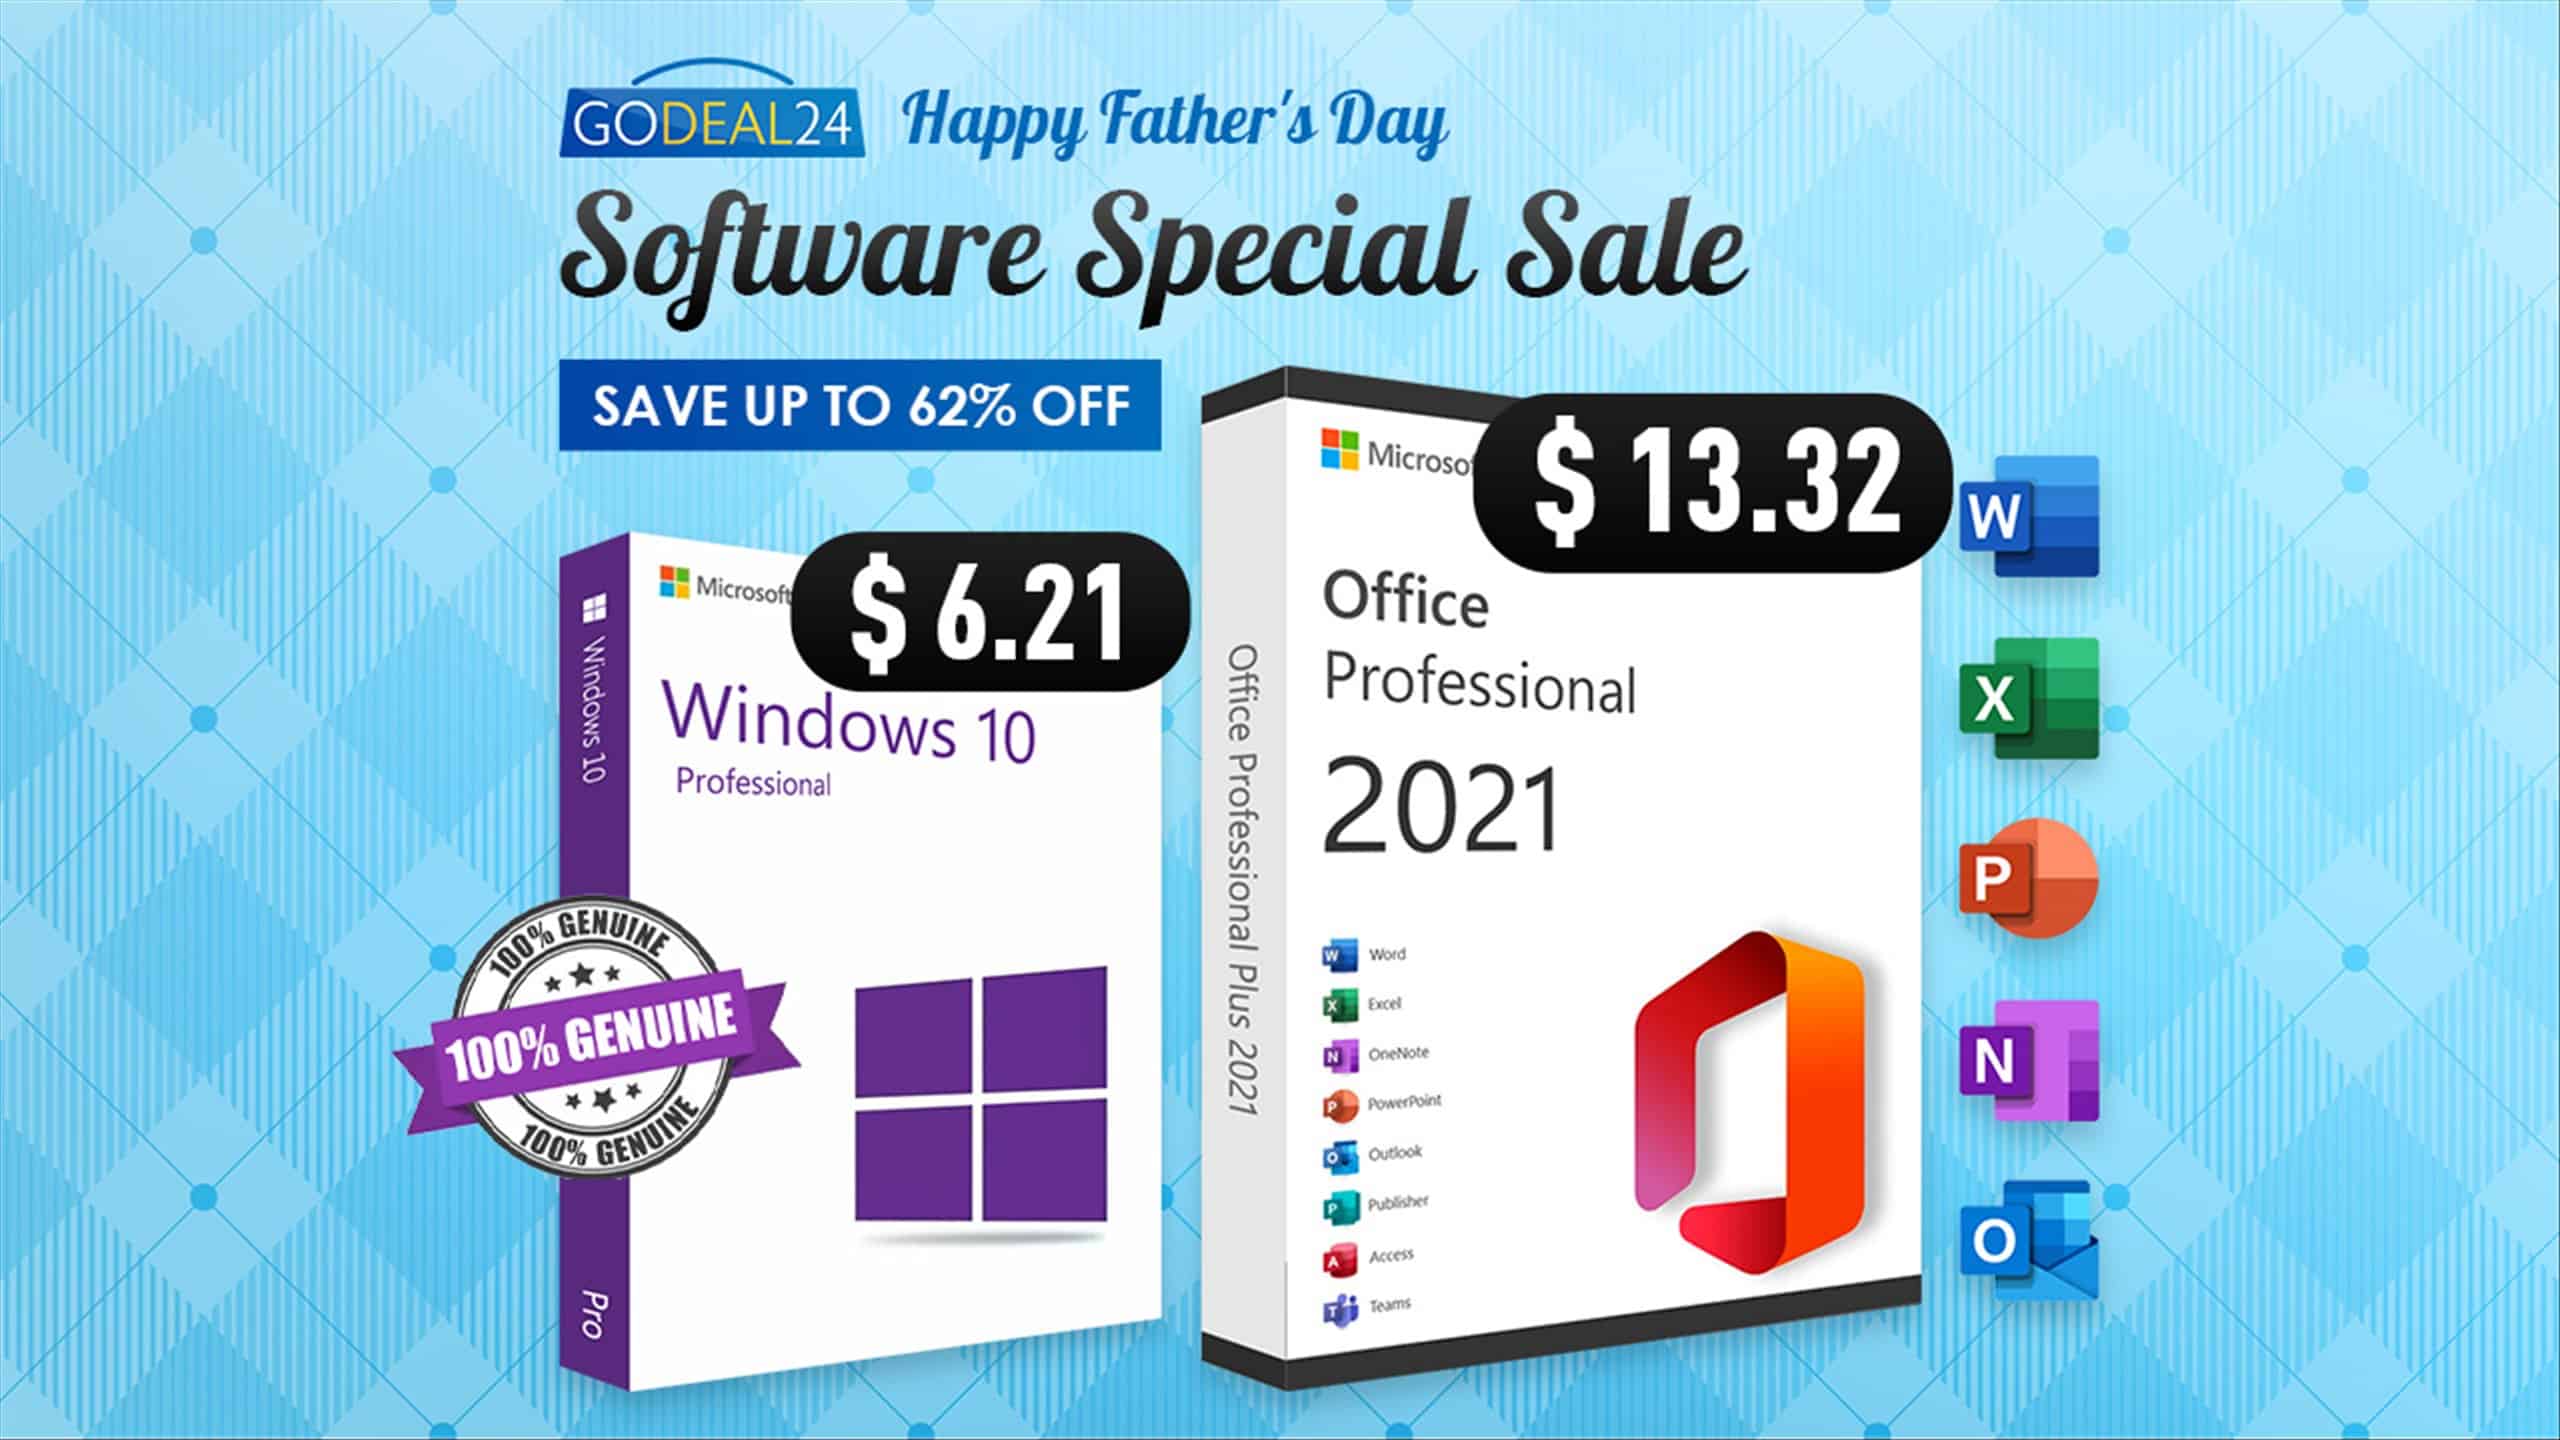 Father’s Day Sale: Genuine lifetime Office 2021 as low as $13.32! Up to 62% off at Godeal24!